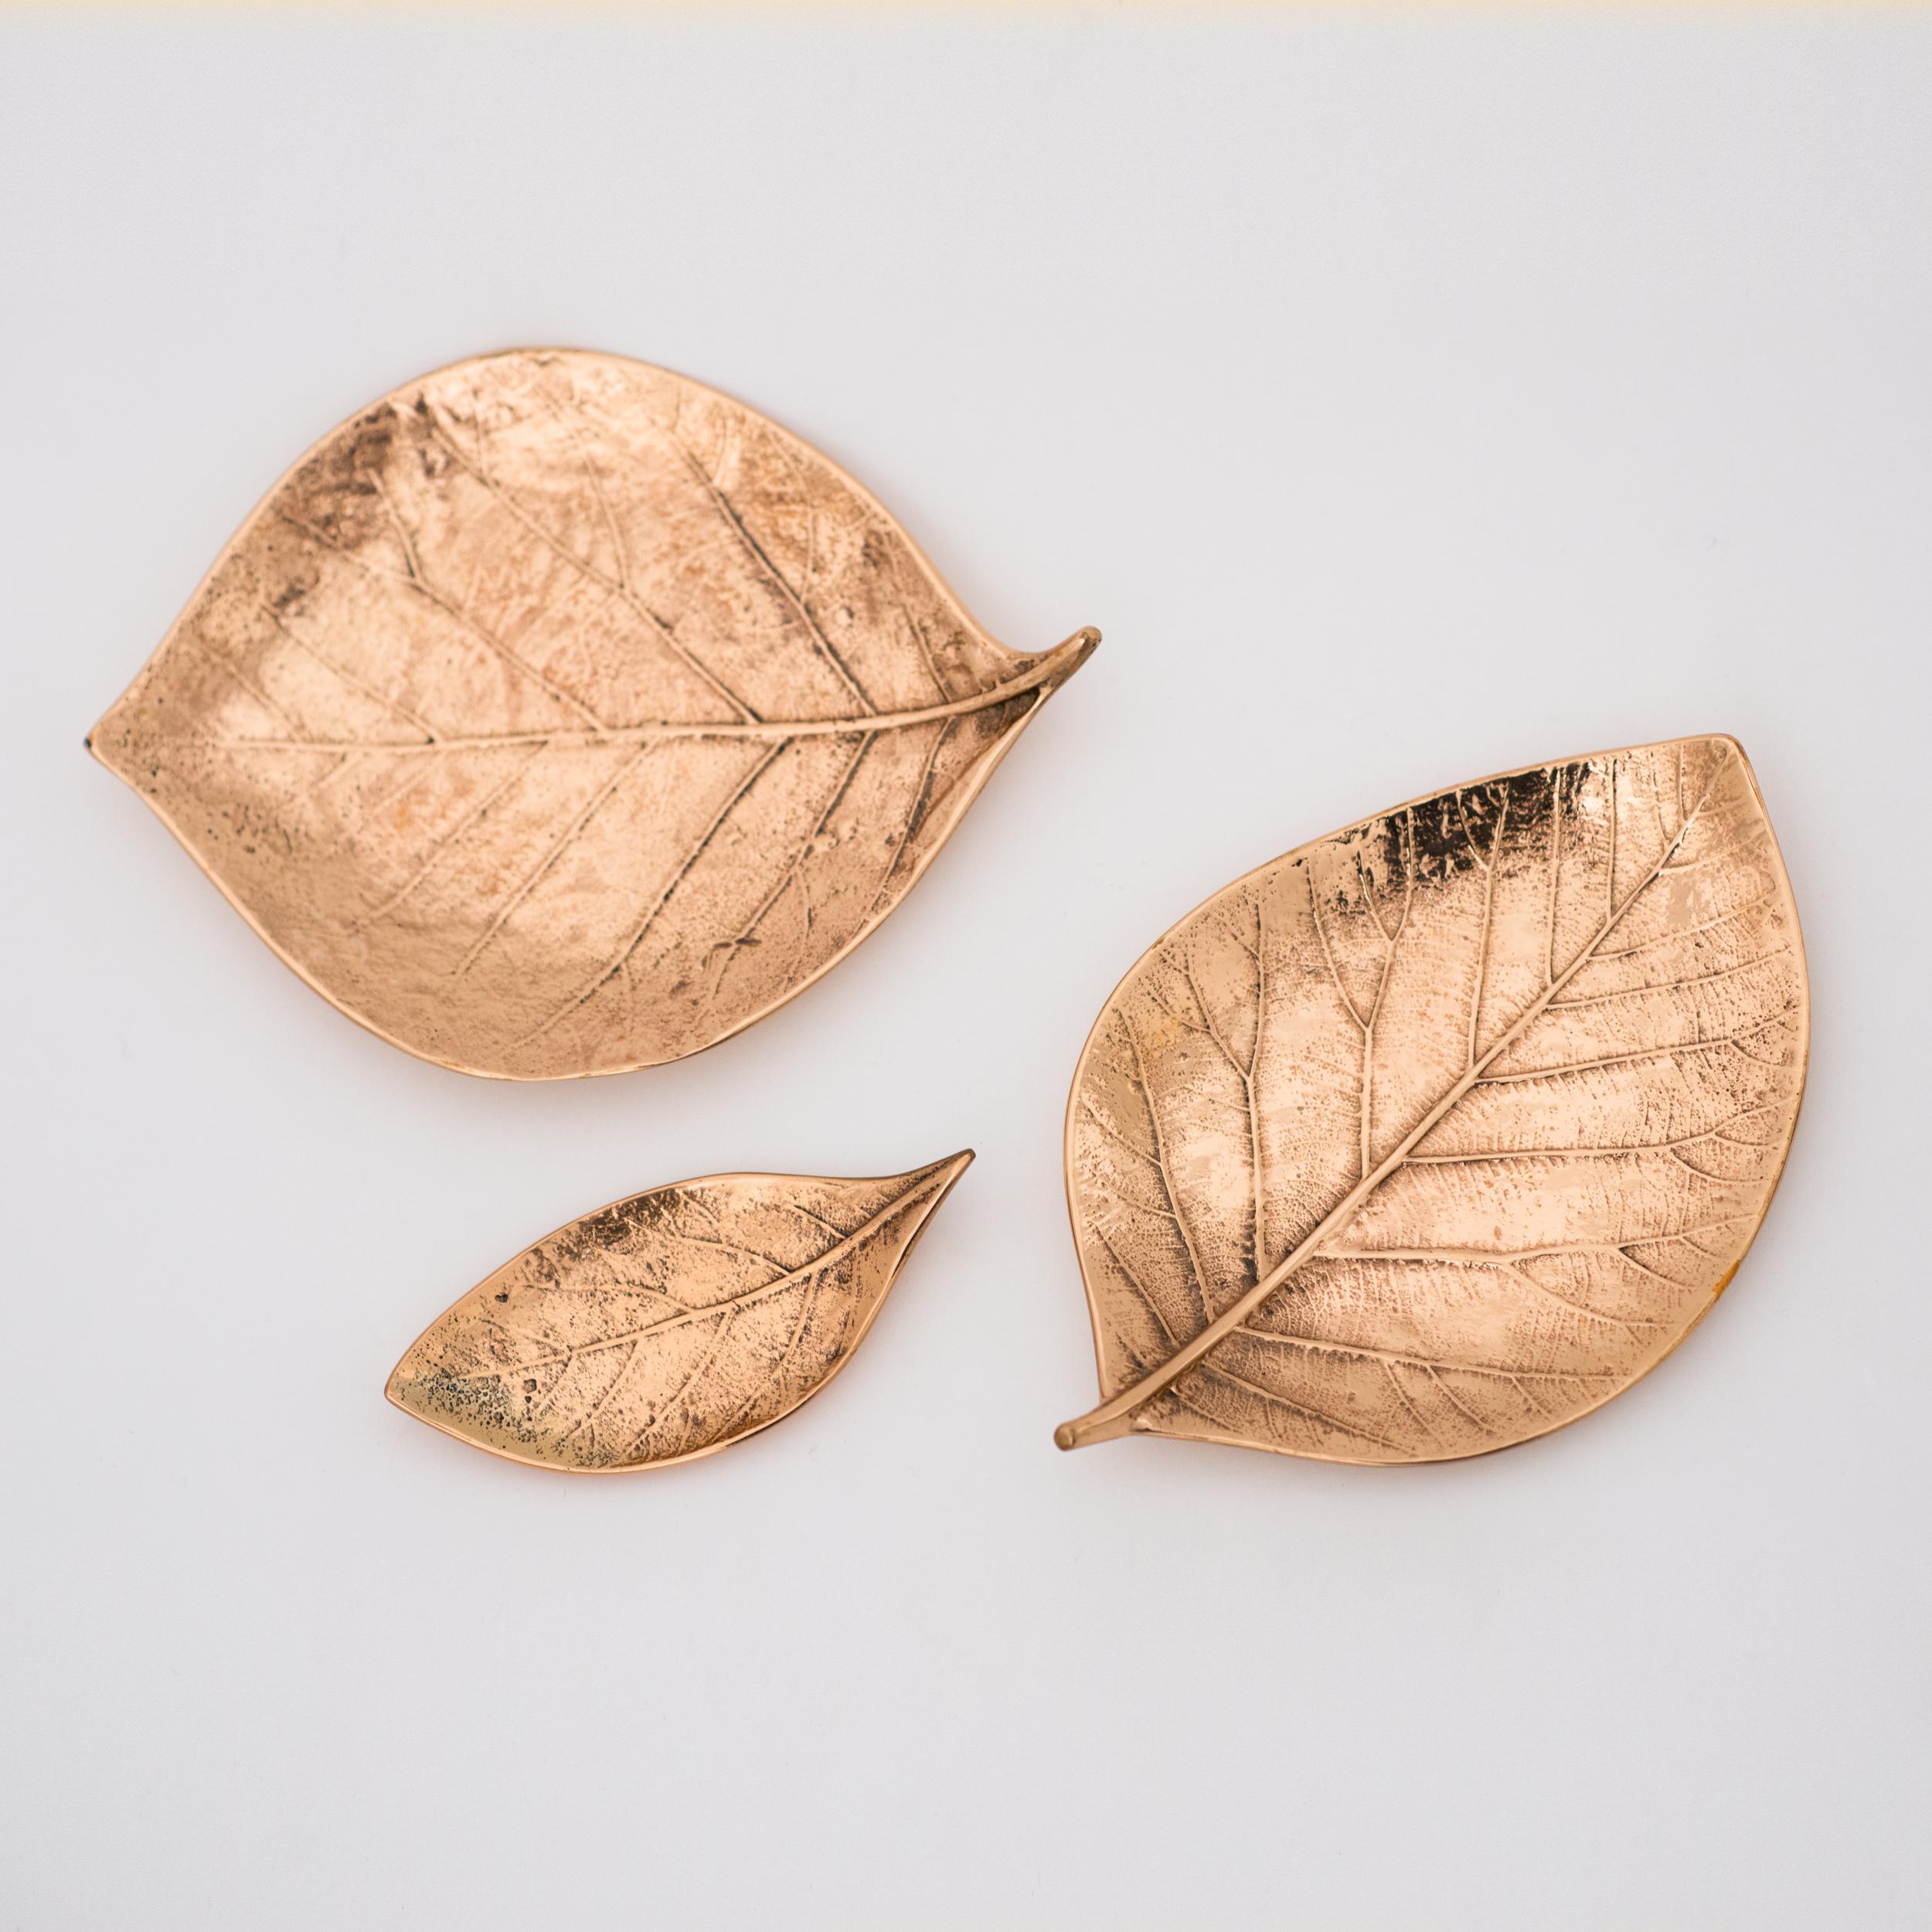 Cluster of bronze leaves. Each of these splendid bronze leaves is handmade individually with incredible detail.

Cast using very traditional techniques, they are polished capturing the raw finish of this noble material, and impressively highlighting